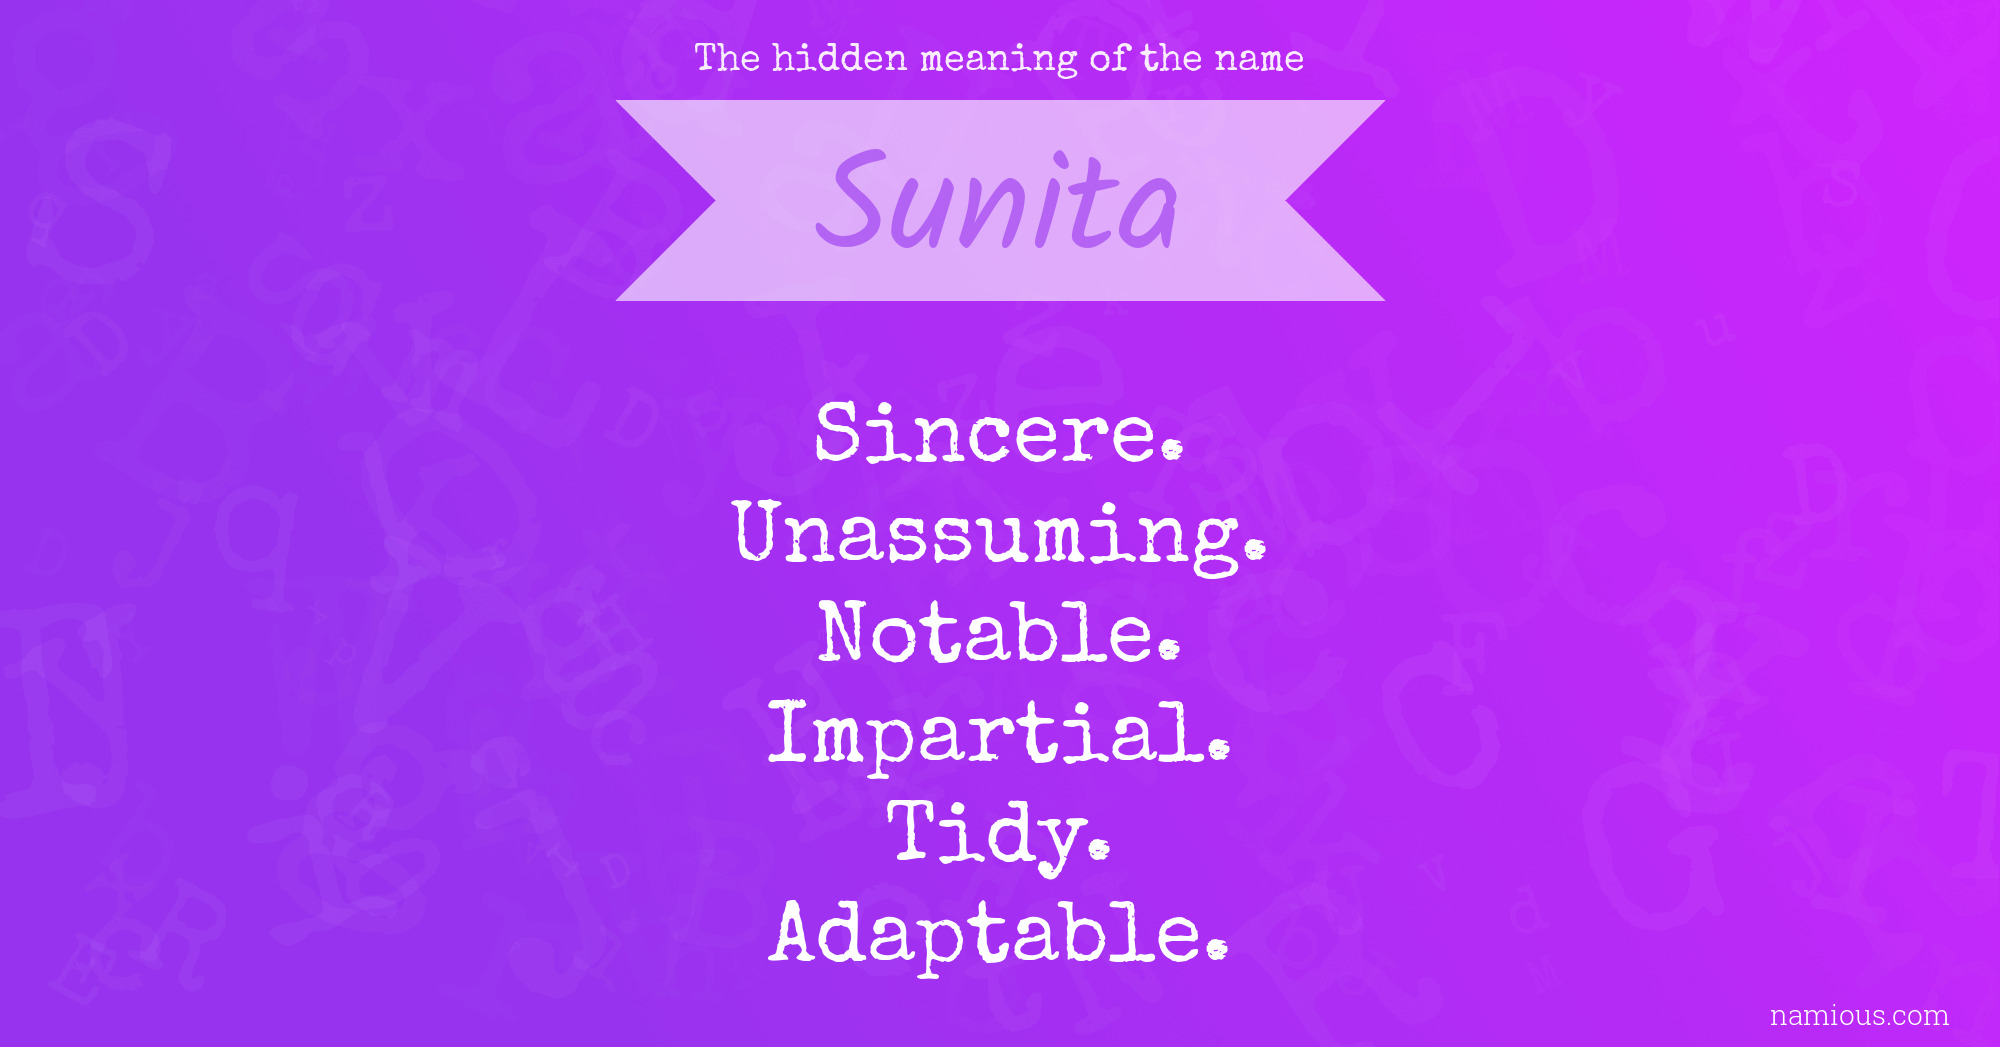 The hidden meaning of the name Sunita